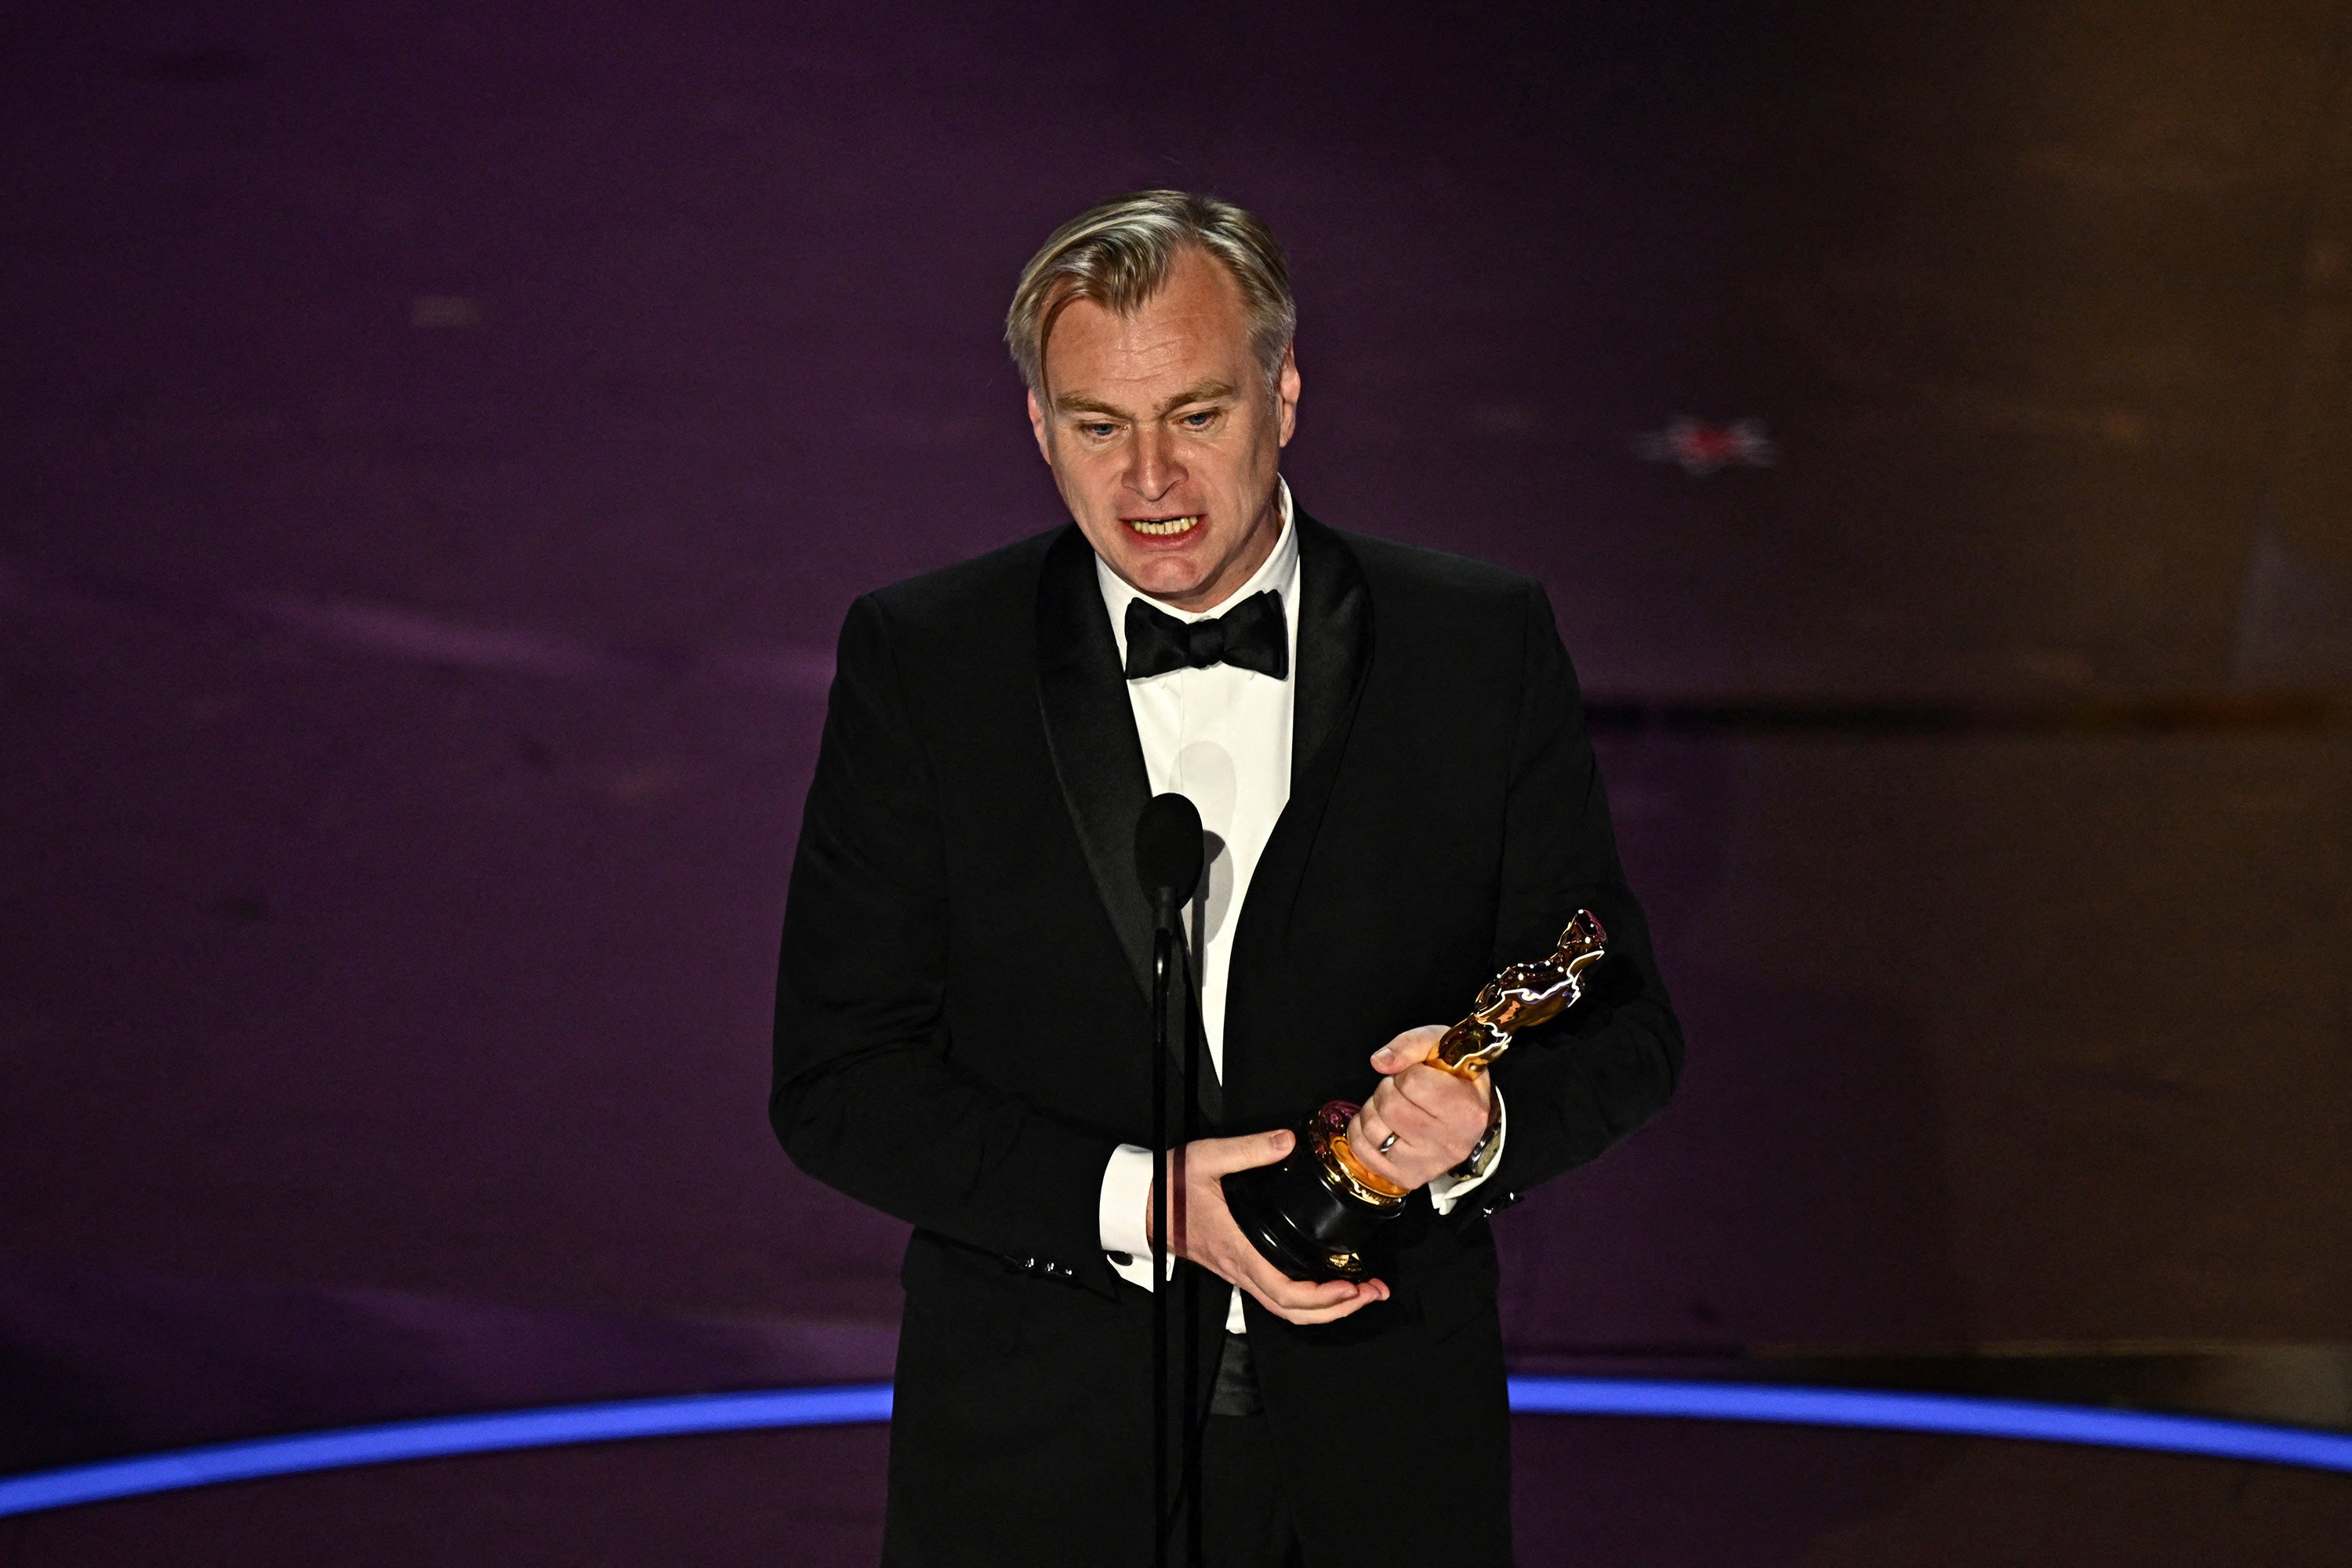 Christopher Nolan accepts the best director Oscar for Oppenheimer in Hollywood, California on March 10. Photo: AFP / Getty Images / TNS